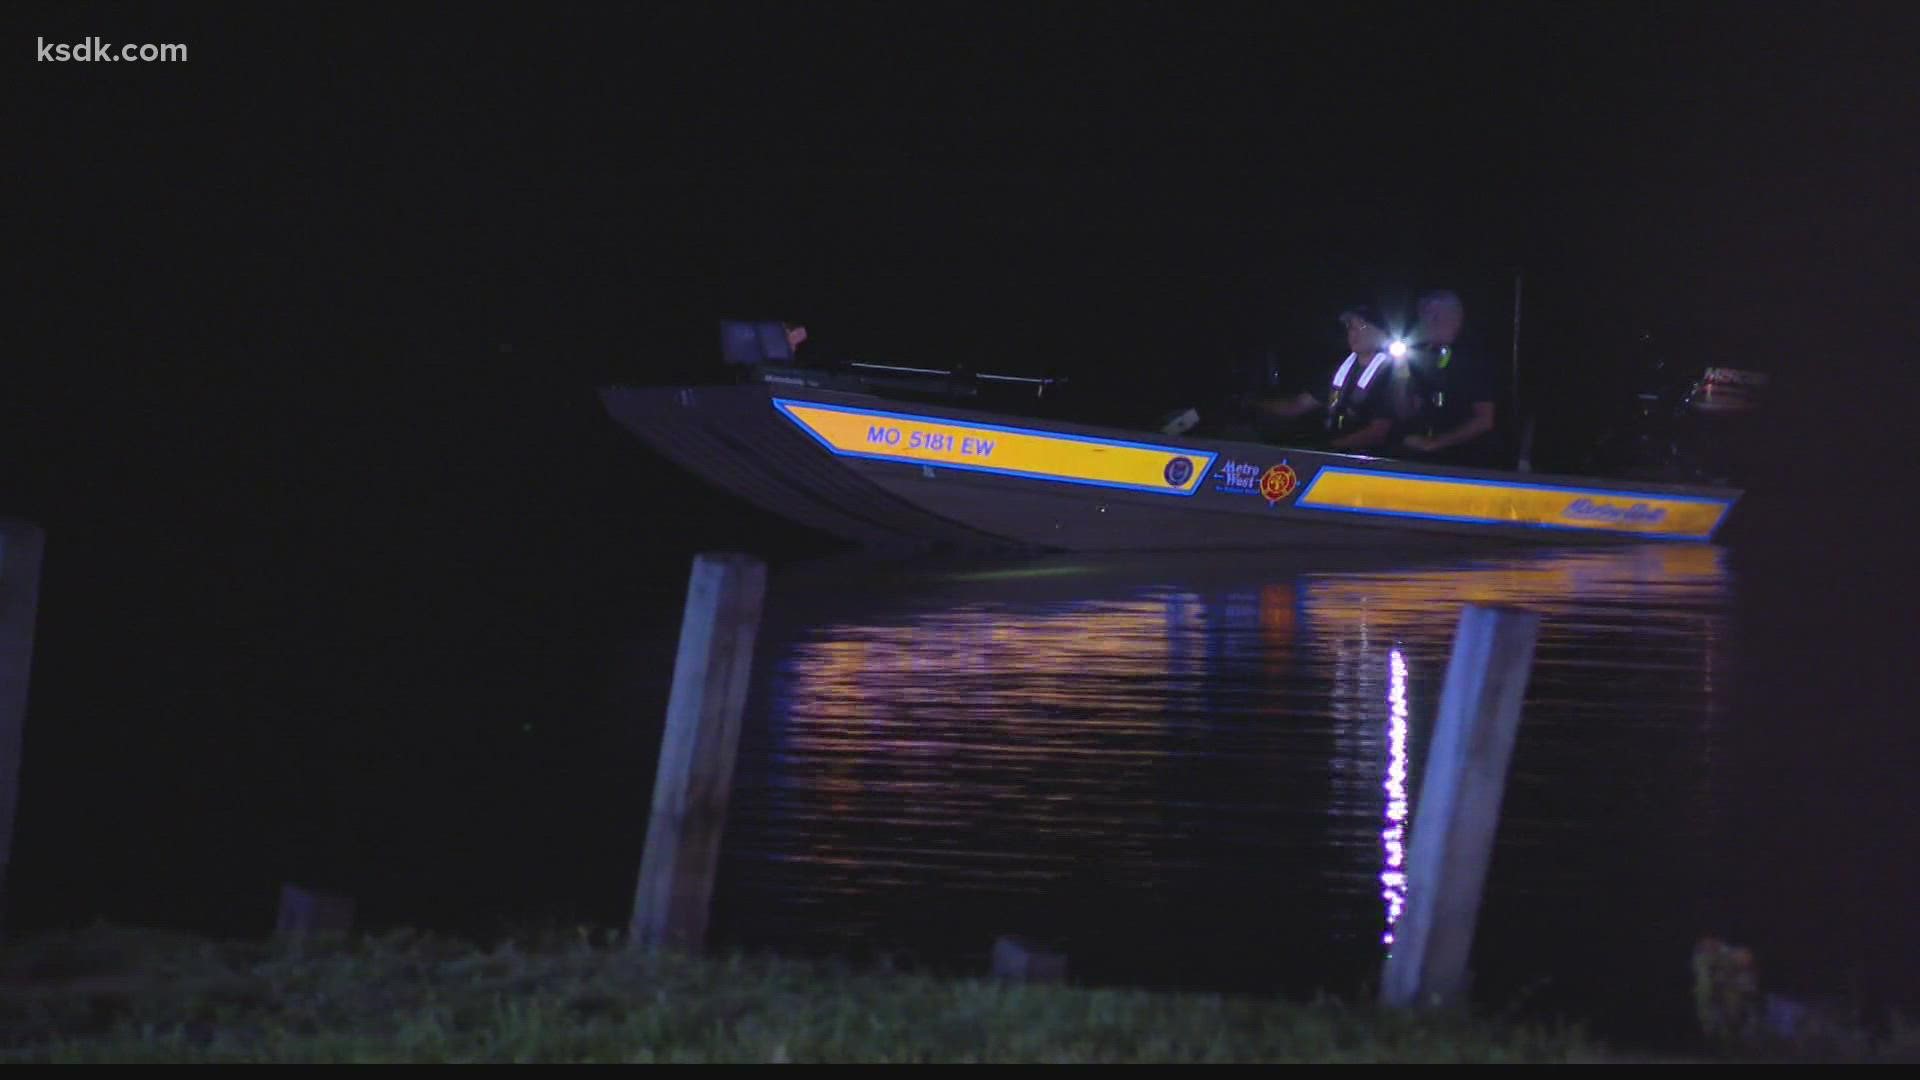 The fire chief said the man was in a boat with three other people when he jumped in the water and did not resurface. His body was recovered about an hour later.